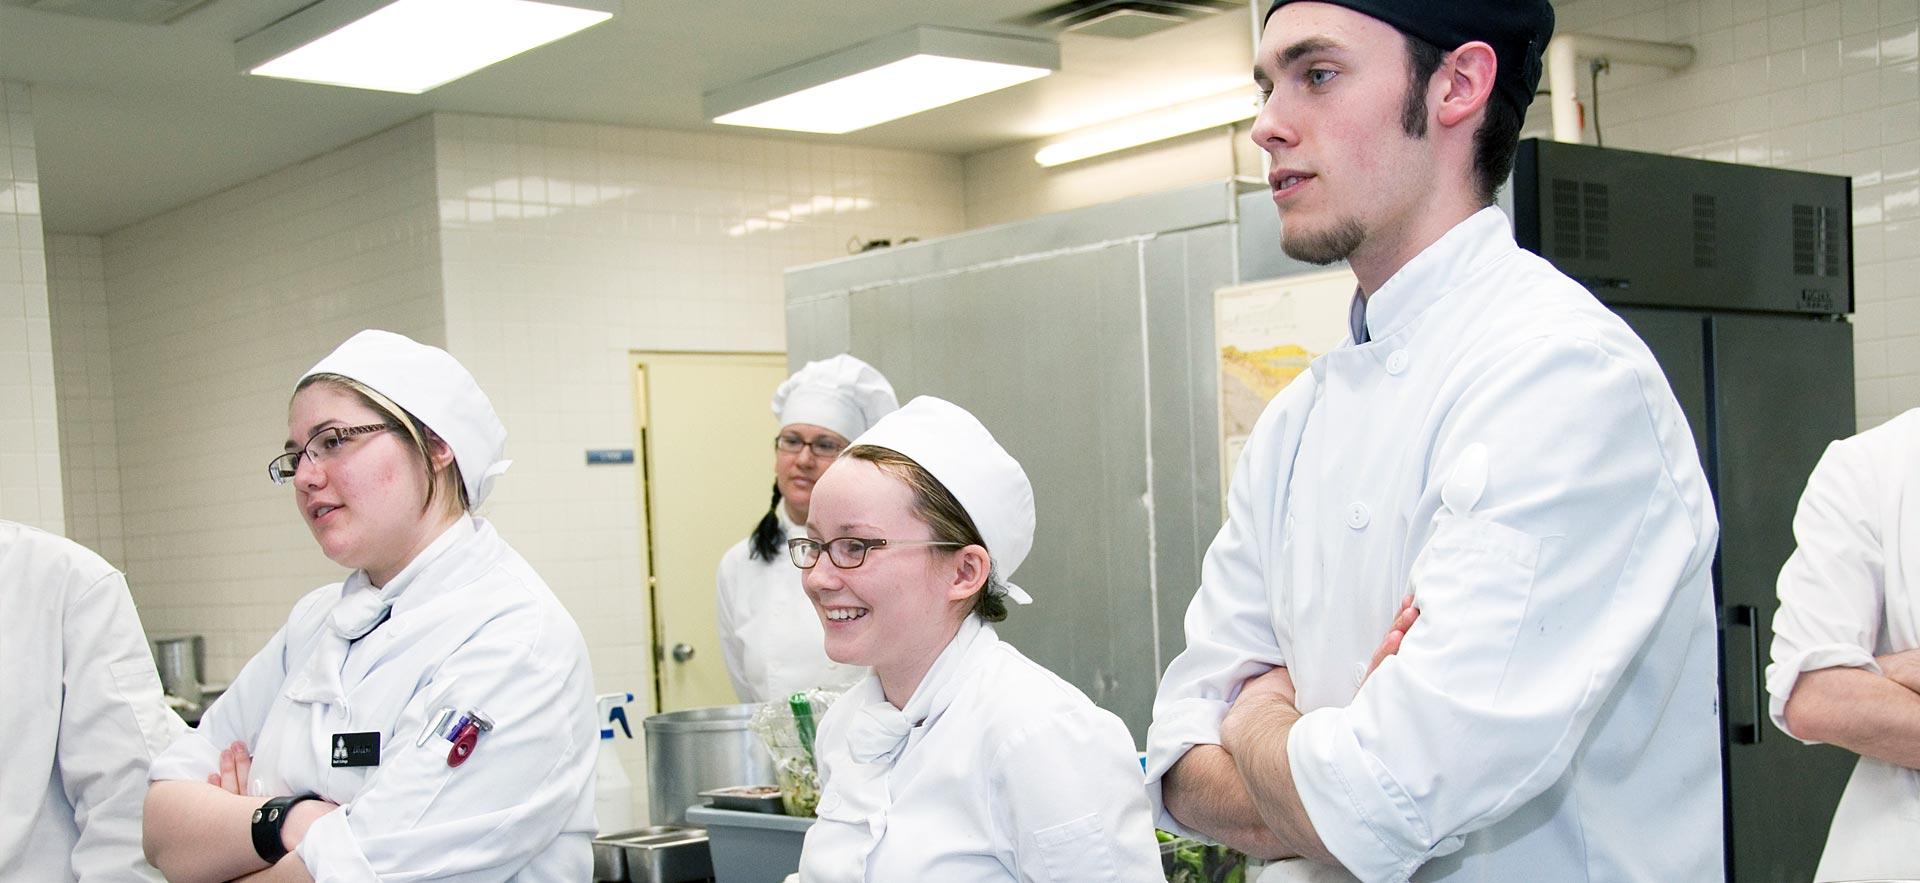 A group of culinary students listen to their instructor in one the ӣƵ culinary kitchens.